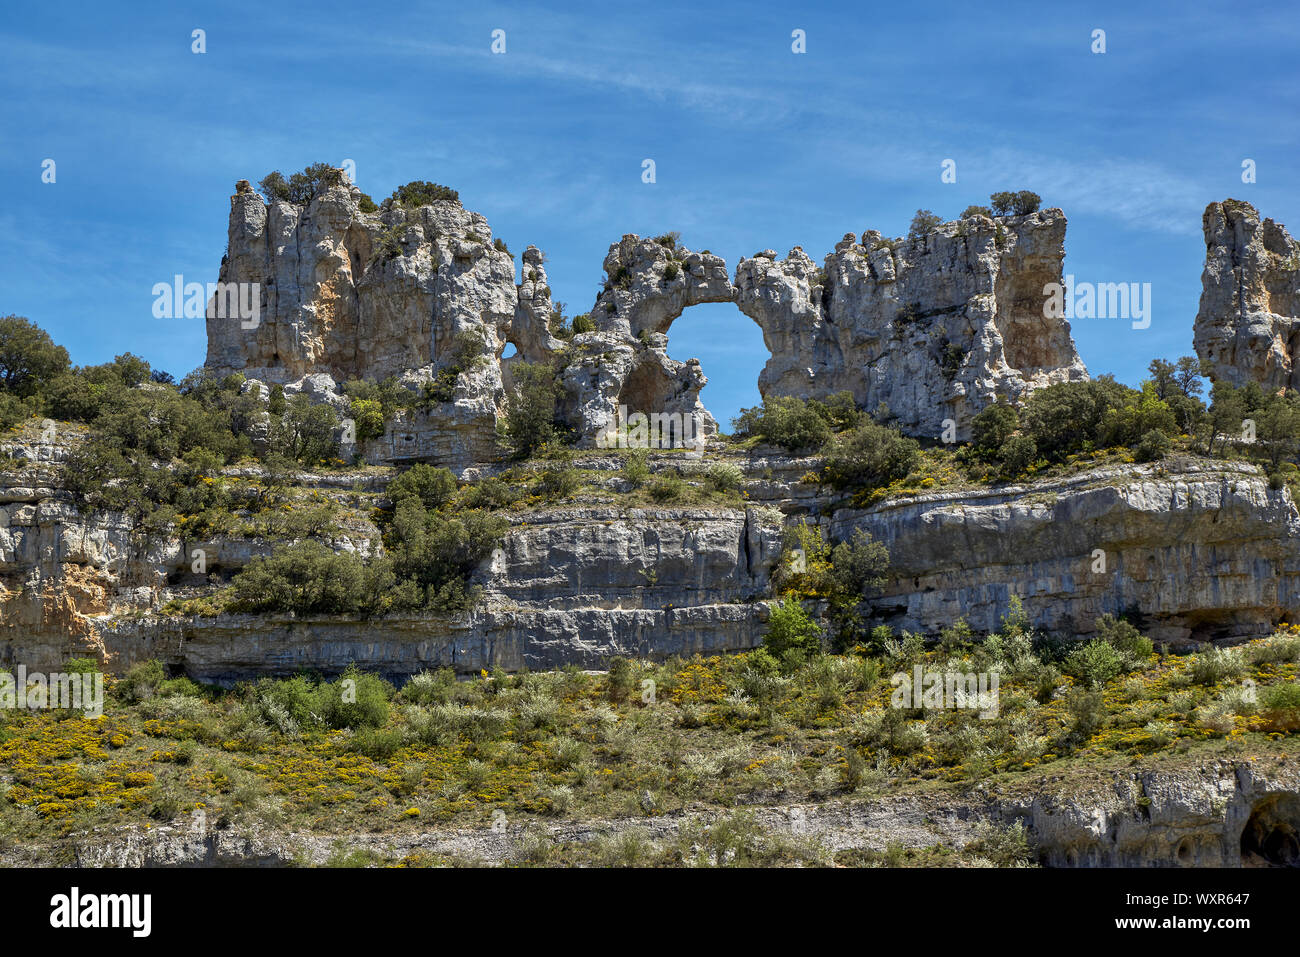 Rock formations in Orbaneja del Castillo known as the Kiss of the Camels, form the map of Africa, Natural Park of the Upper Ebro, Castile-León. Spain Stock Photo